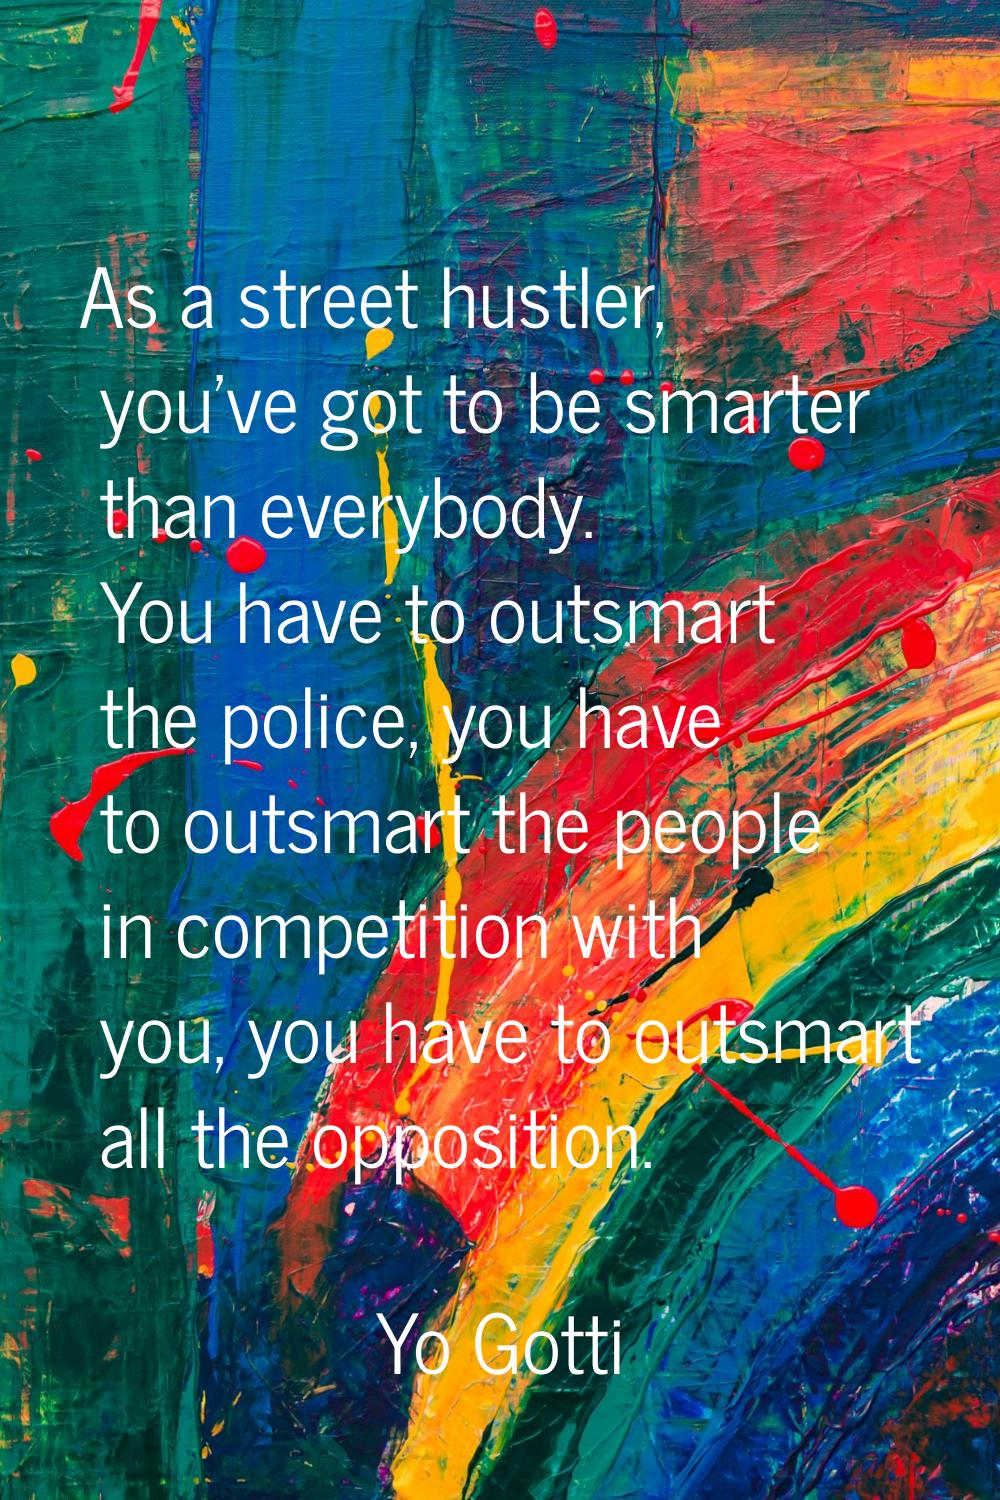 As a street hustler, you've got to be smarter than everybody. You have to outsmart the police, you 